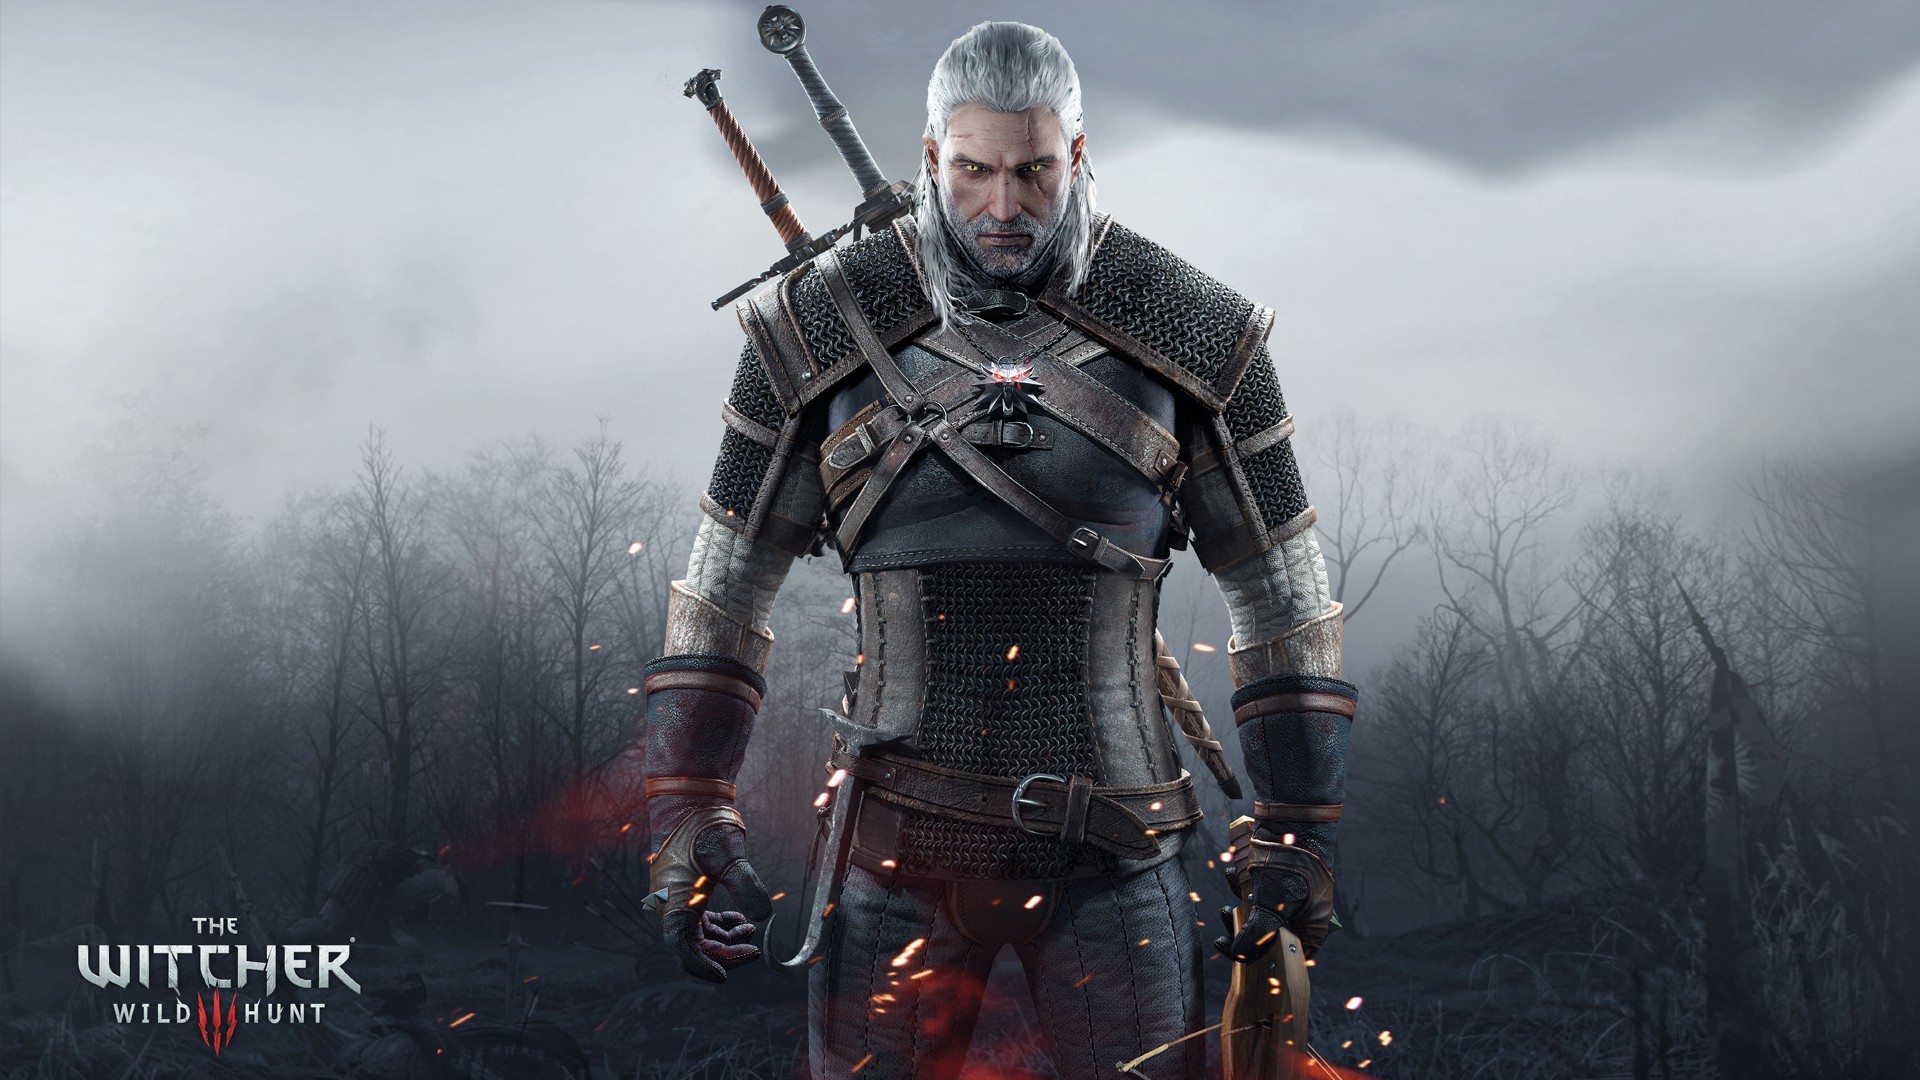 General 1920x1080 Geralt of Rivia The Witcher The Witcher 3: Wild Hunt frontal view video game men men fantasy men CD Projekt RED video game art PC gaming looking at viewer yellow eyes